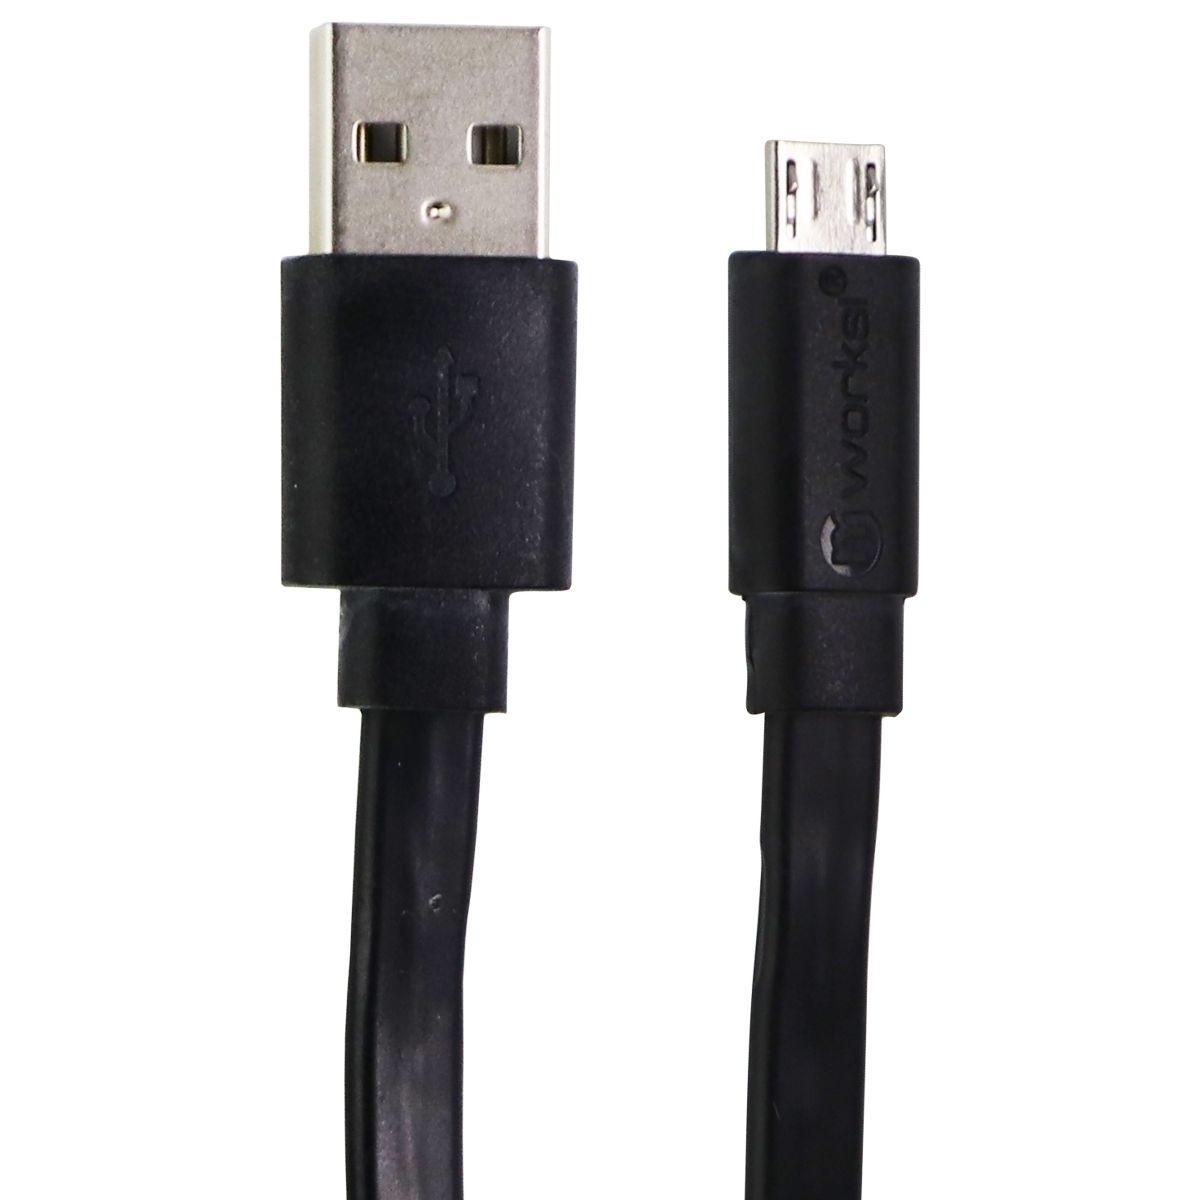 MWorks! MPOWER! (6-Foot) Micro-USB To USB Flat Cable - Black